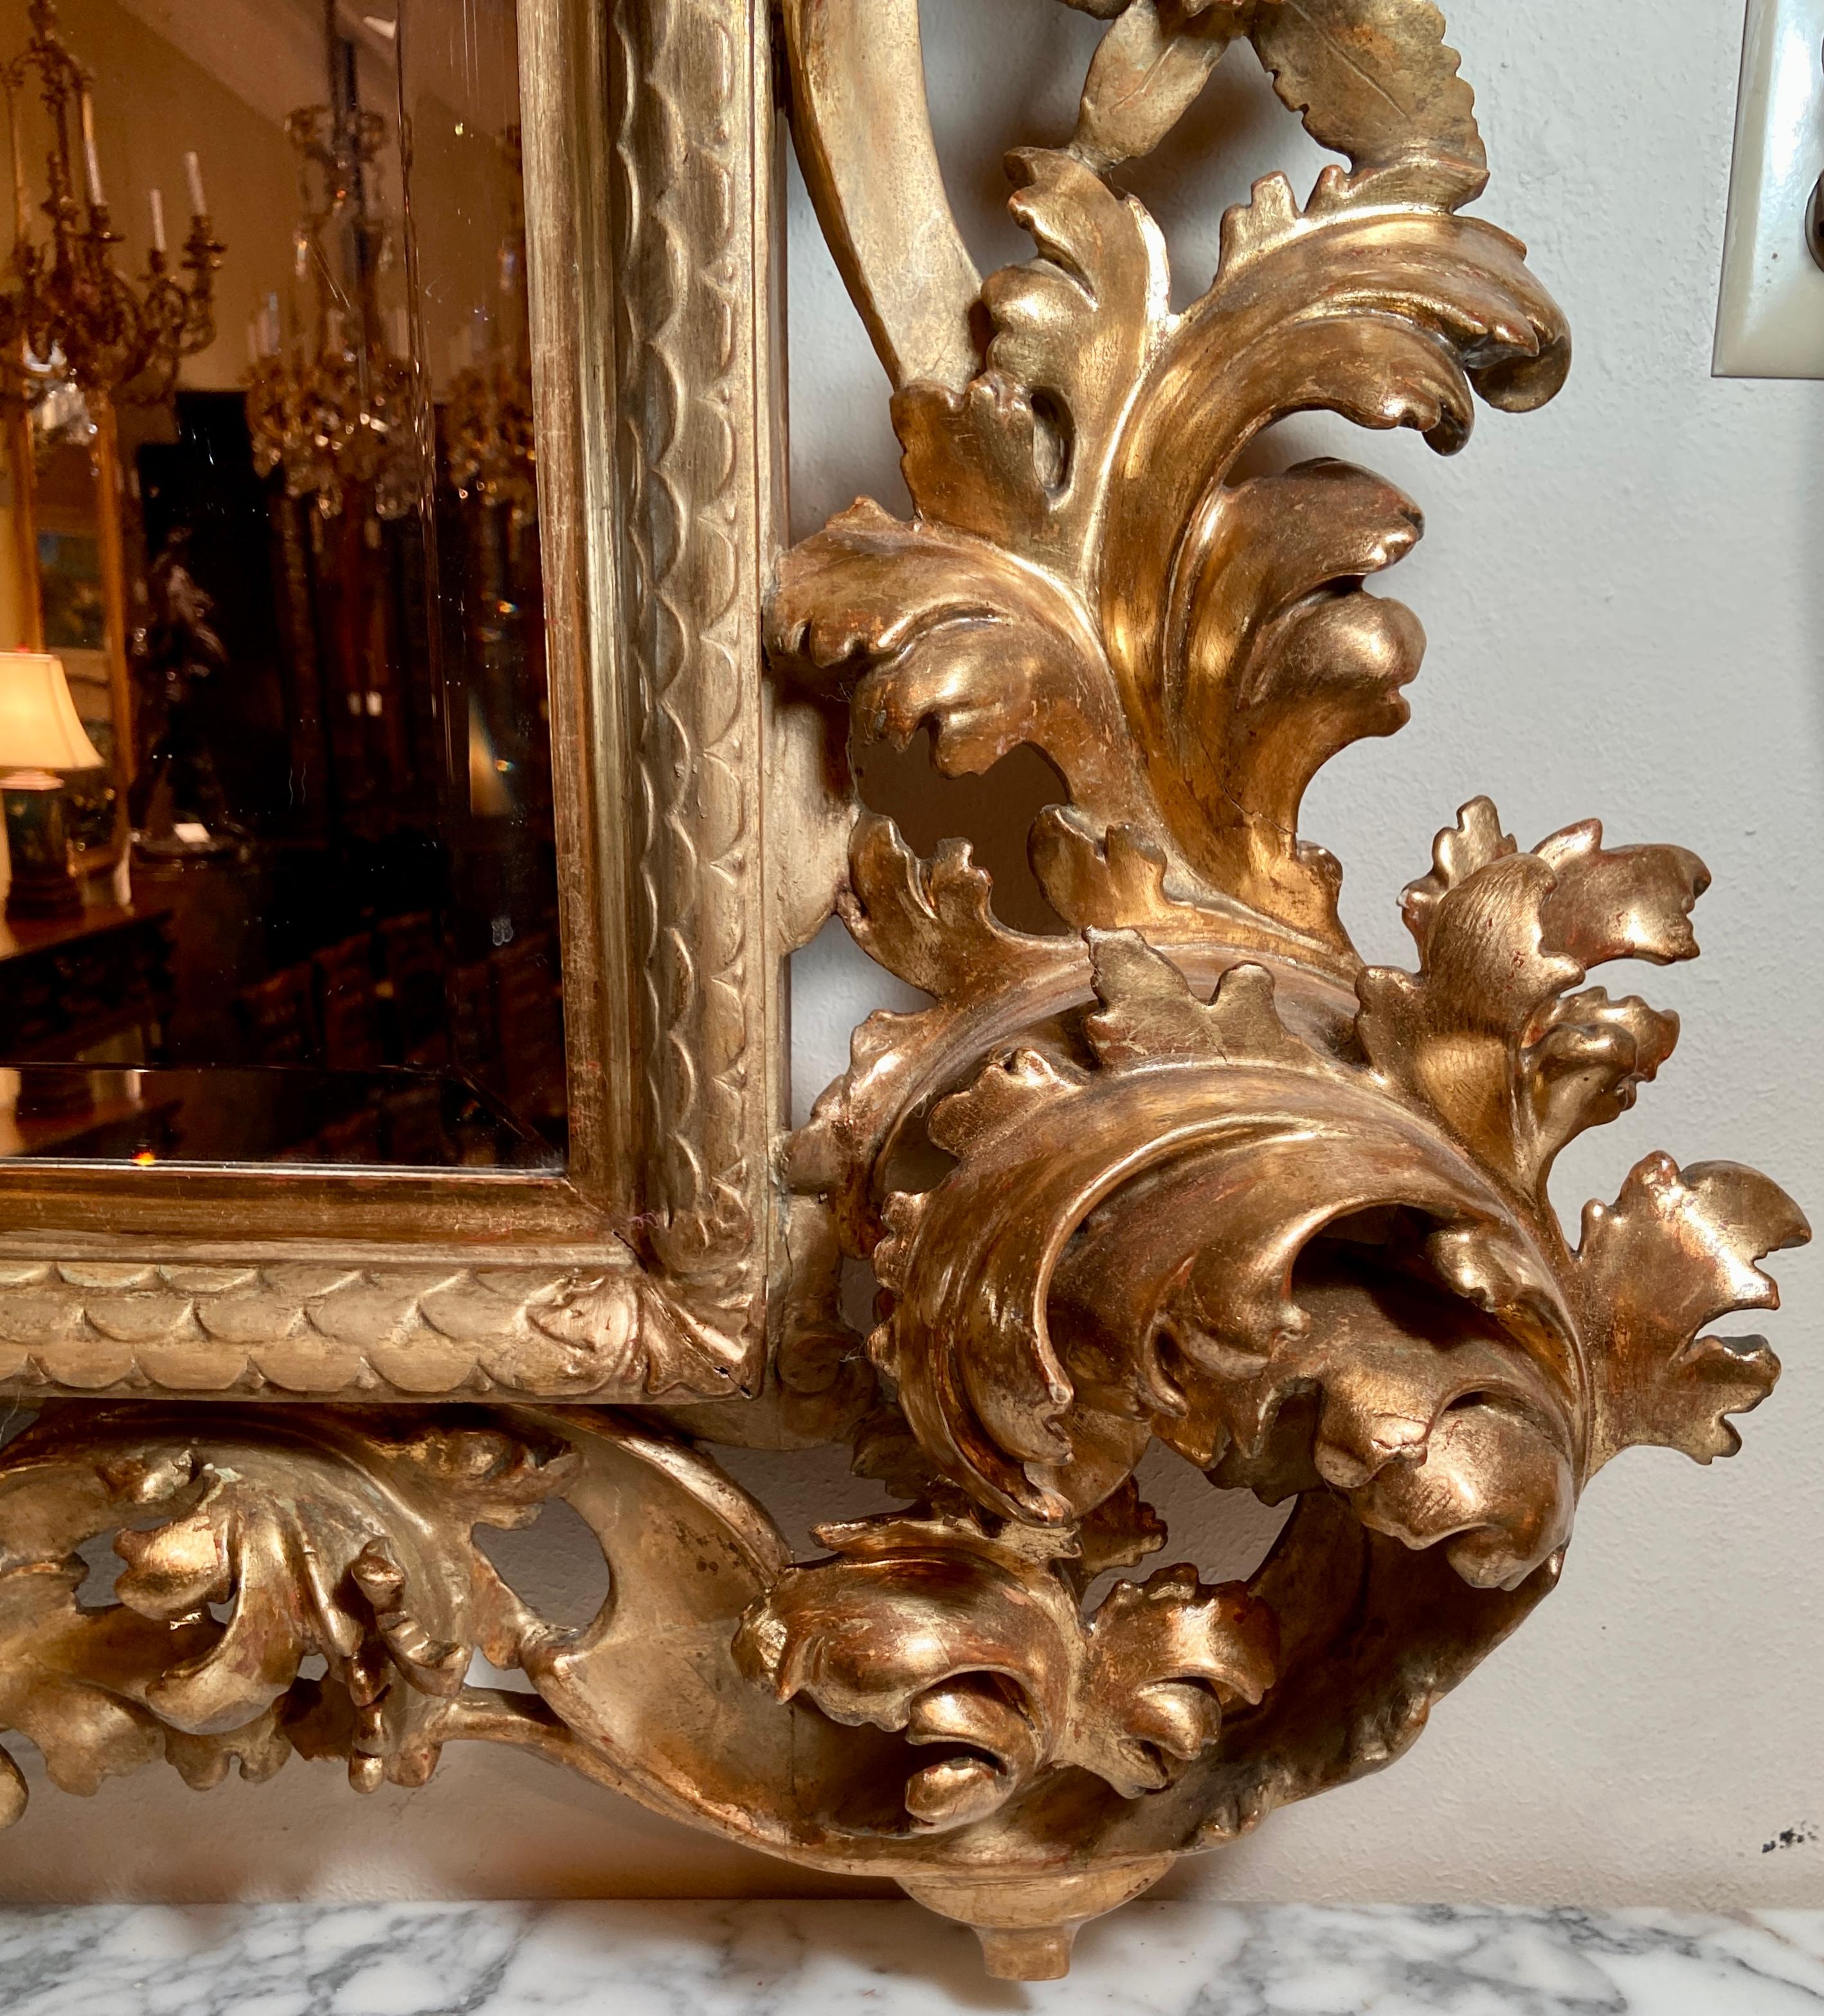 Antique 19th century extraordinary carved wood with gold leaf beveled mirror, circa 1880-1890.